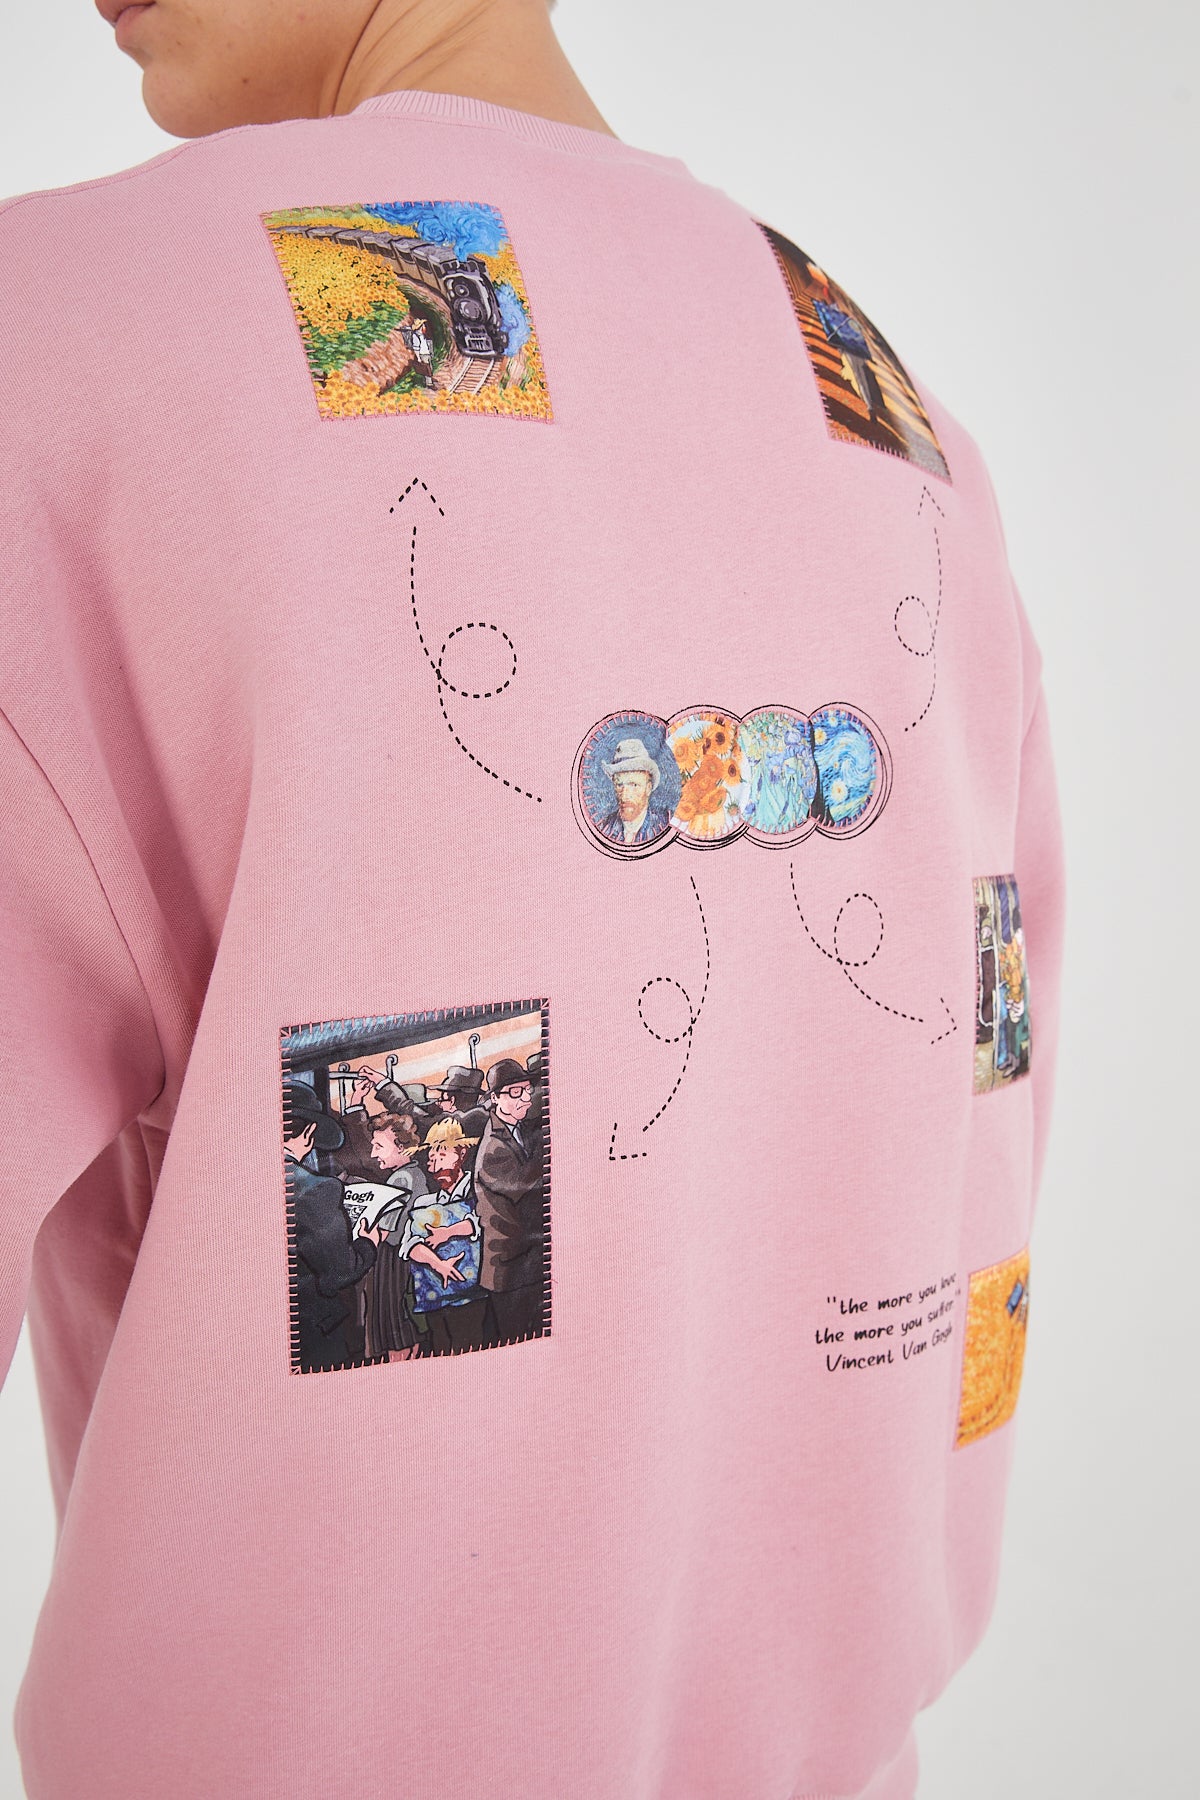 SWEATER - PIECES OF VANGOGH - PINK